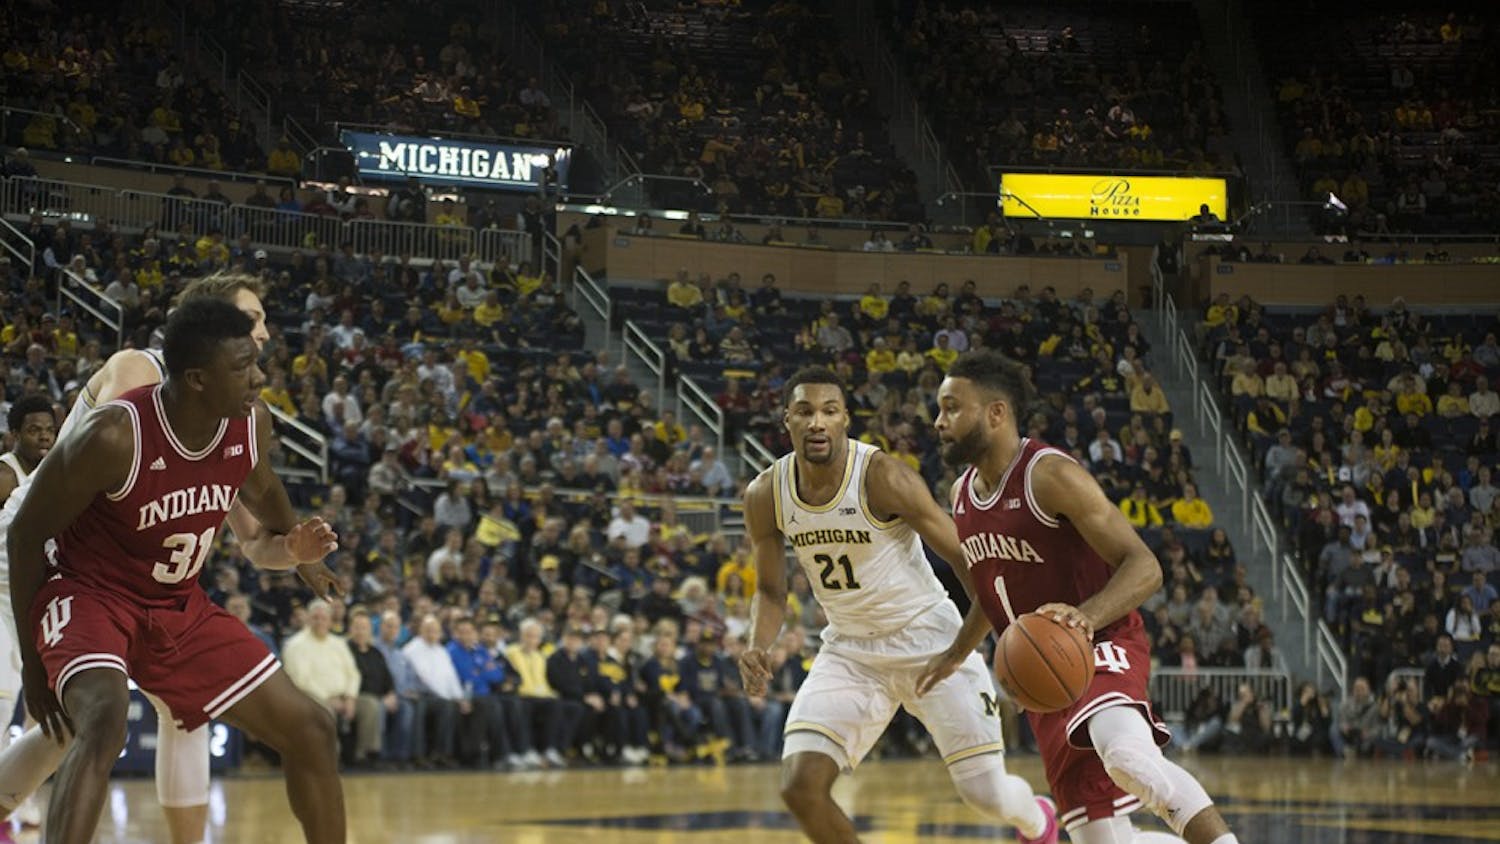 Junior guard James Blackmon Jr. drives to the basket during IU's loss to Michigan on Thursday. Blackmon scored just 4 points in the loss and will be out indefinitely after an injury sustained during the game.